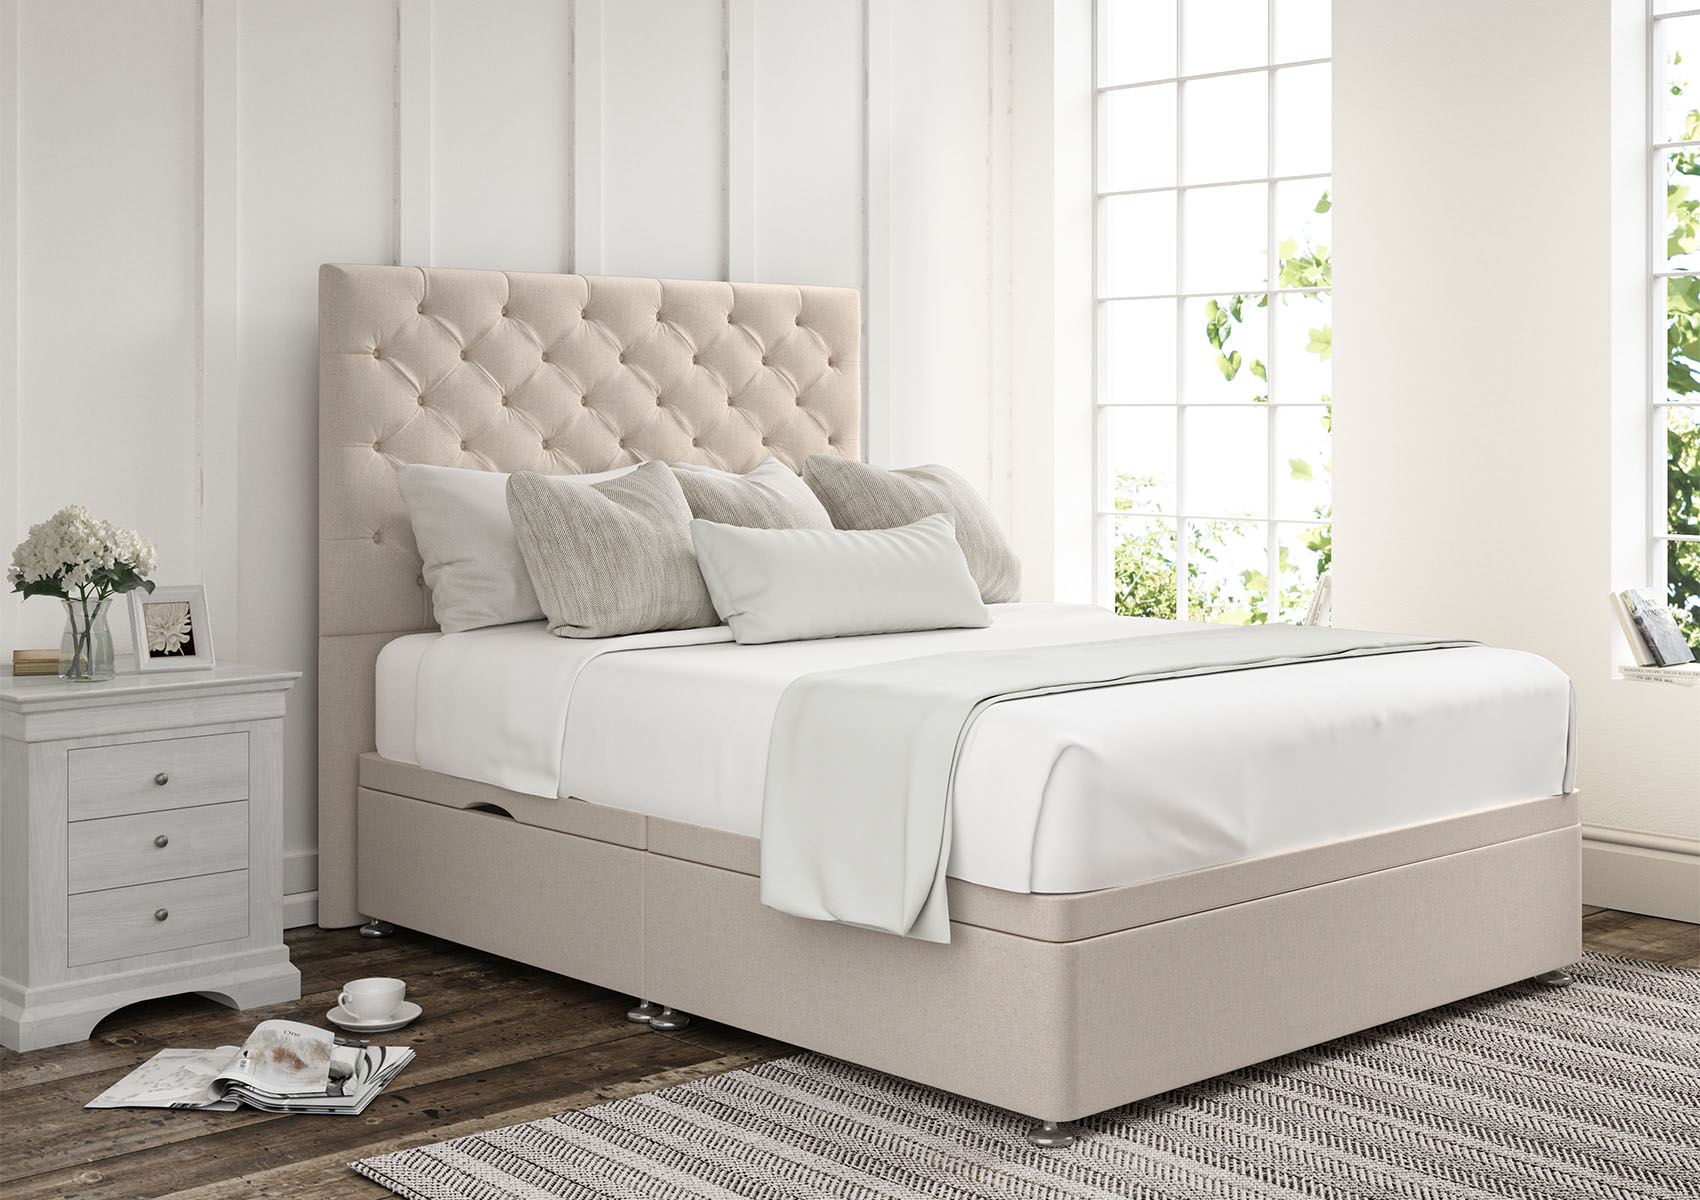 View Chesterfield Arlington Ice Upholstered Double Ottoman Bed Time4Sleep information